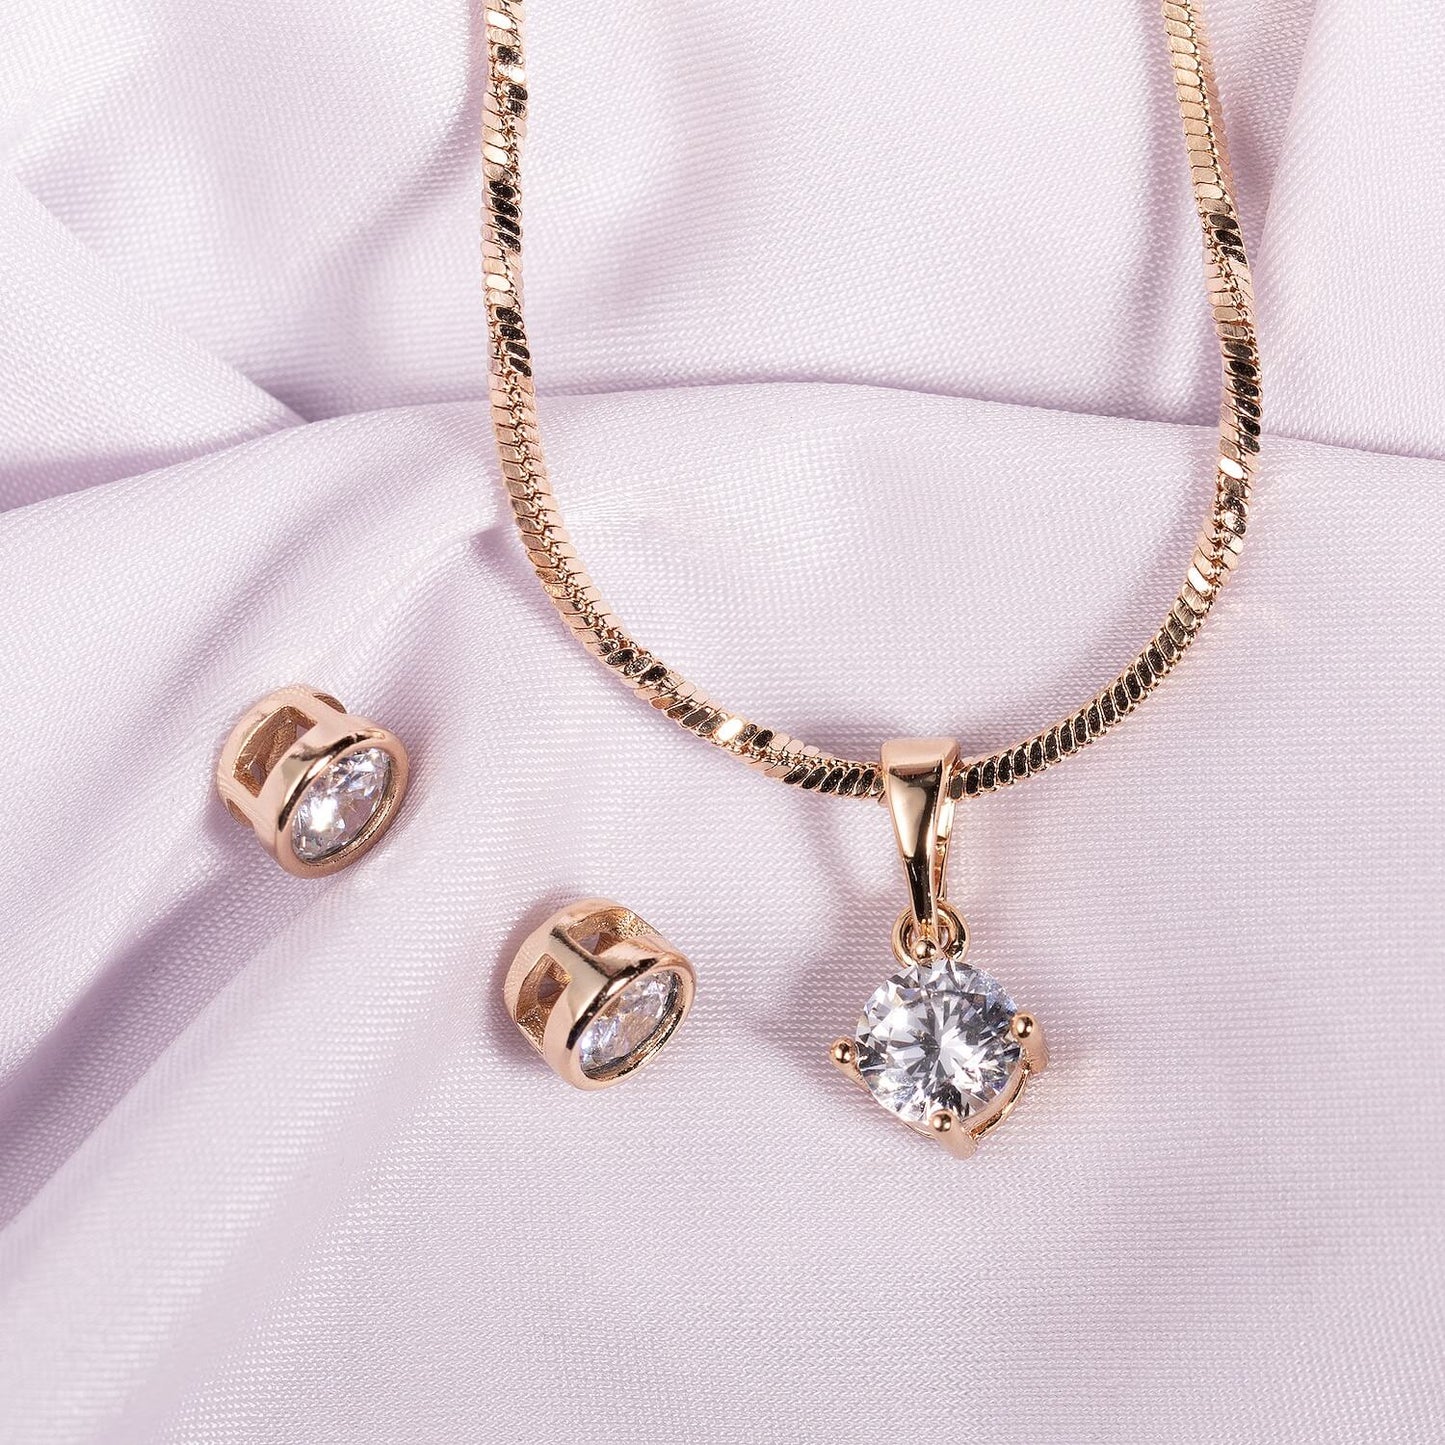 Rose gold jewelery set 'stud earrings and classic necklace'